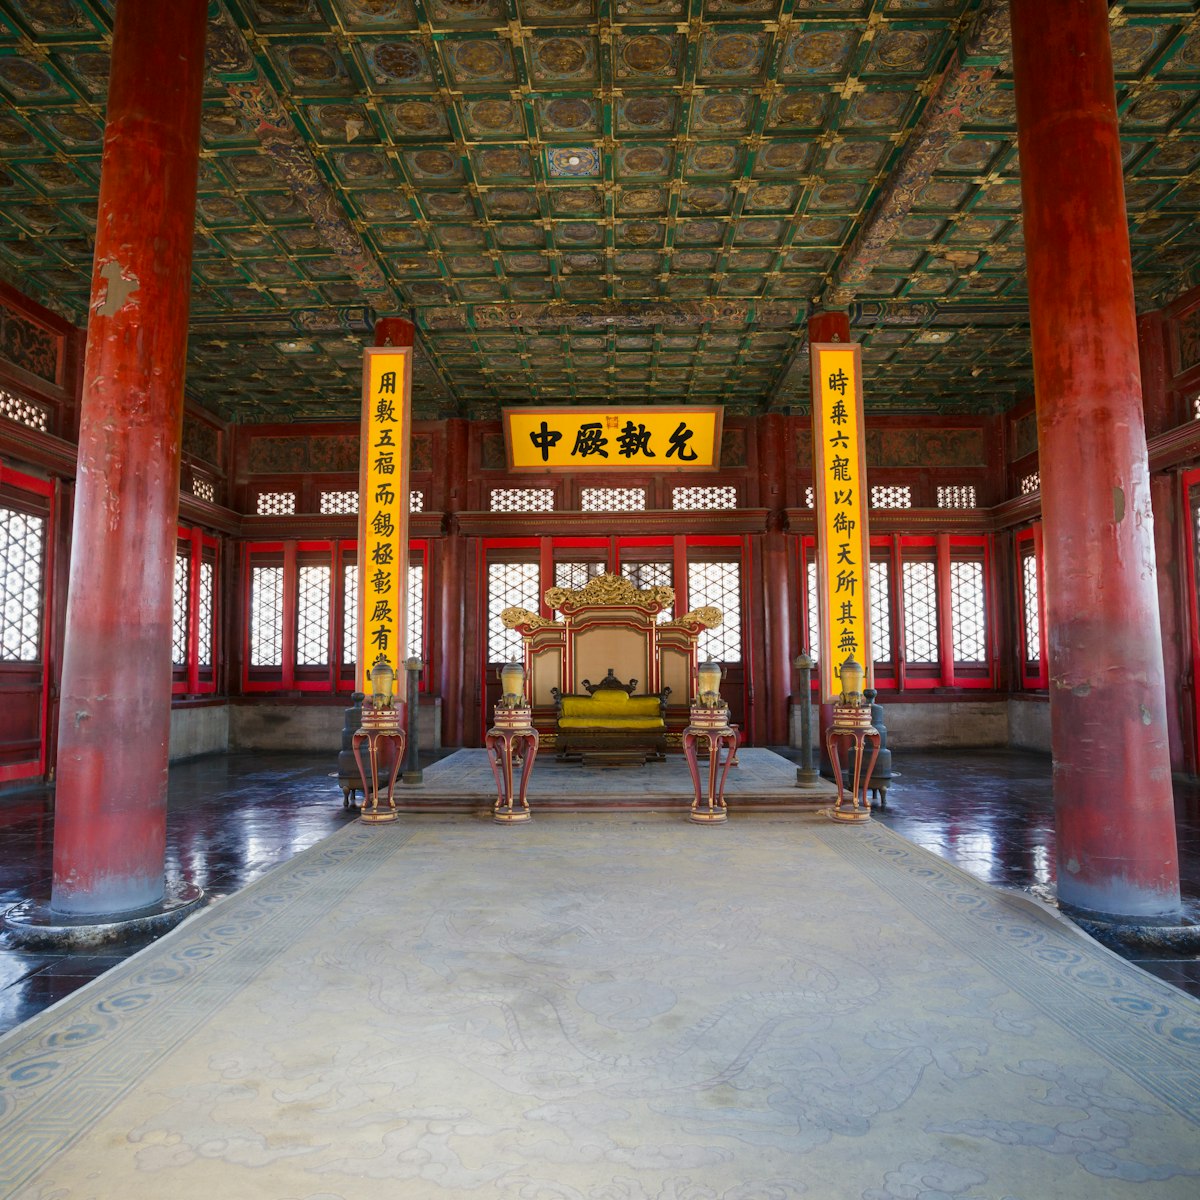 The Hall of Central Harmony in Forbidden City.